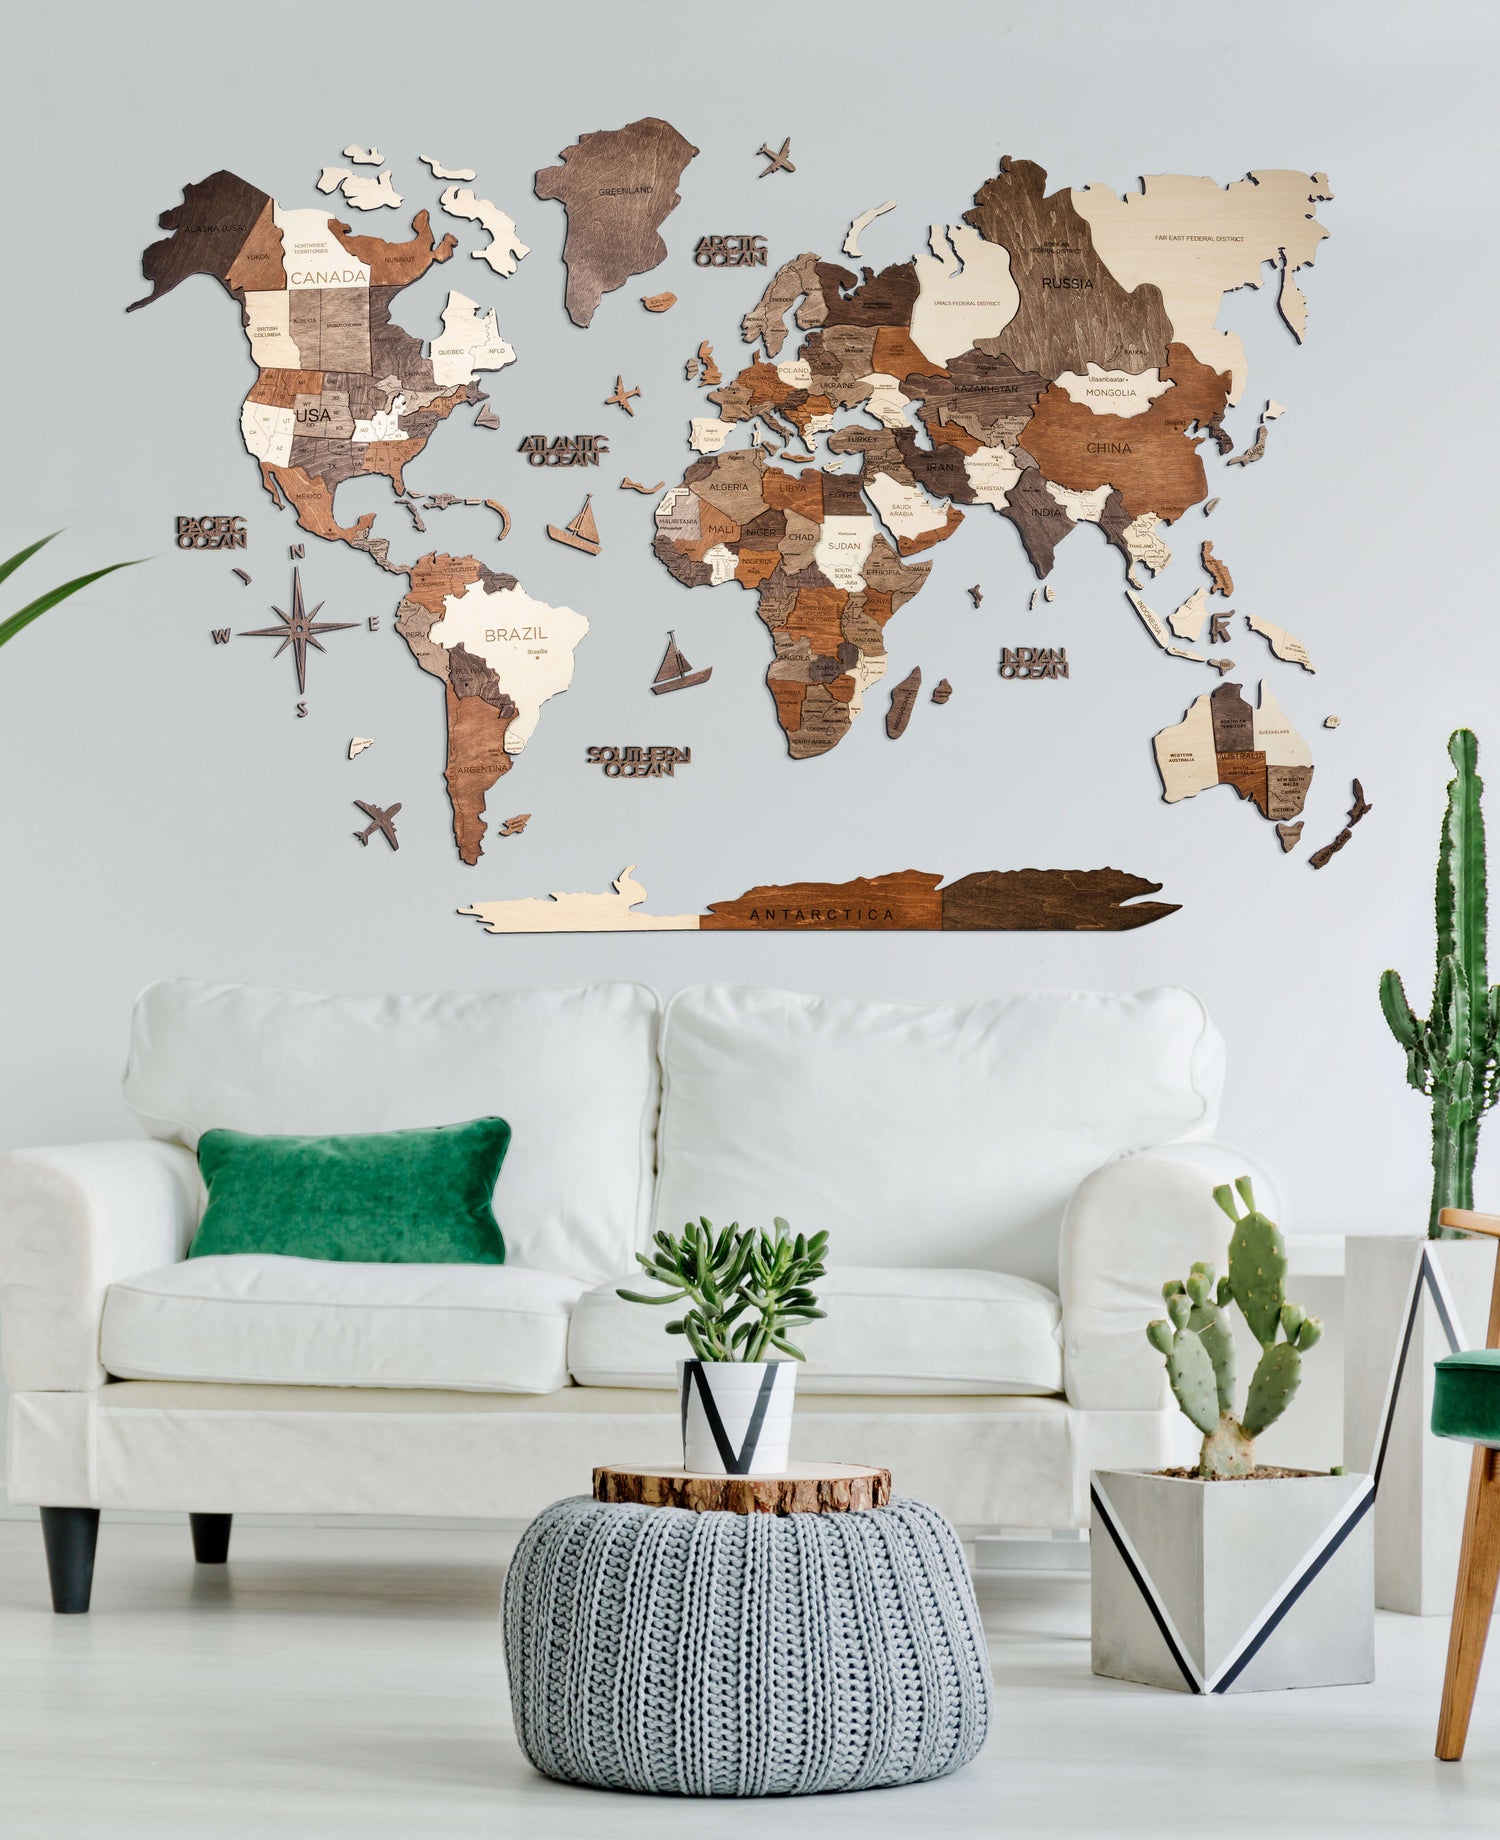 A 3D Wooden Map in Multicolor in a Living Room